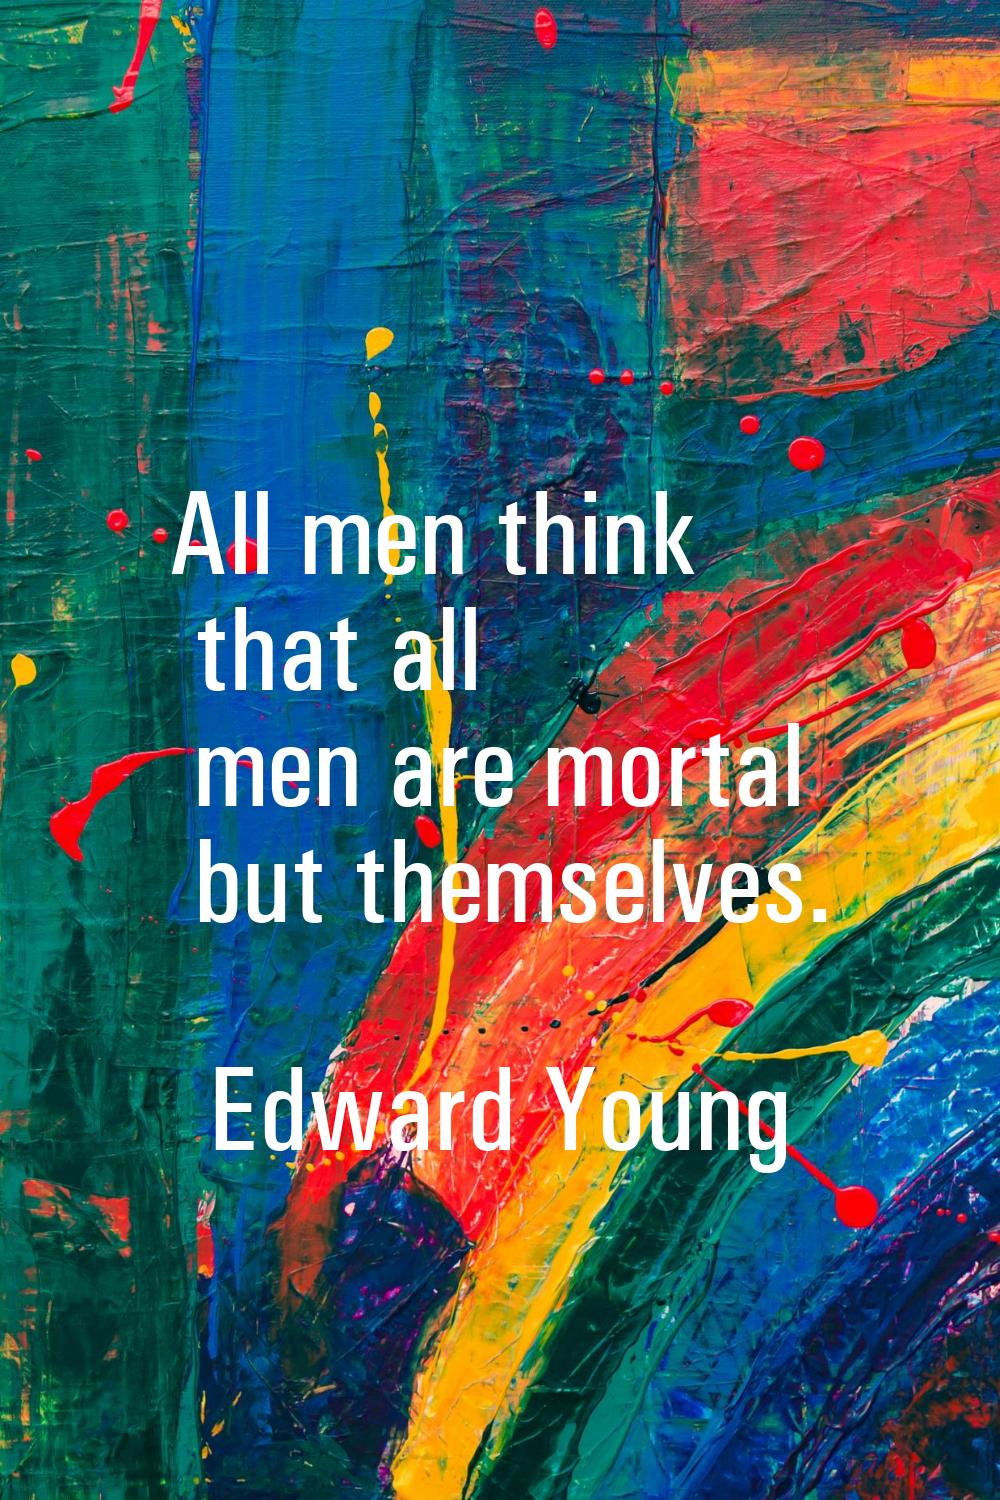 All men think that all men are mortal but themselves.